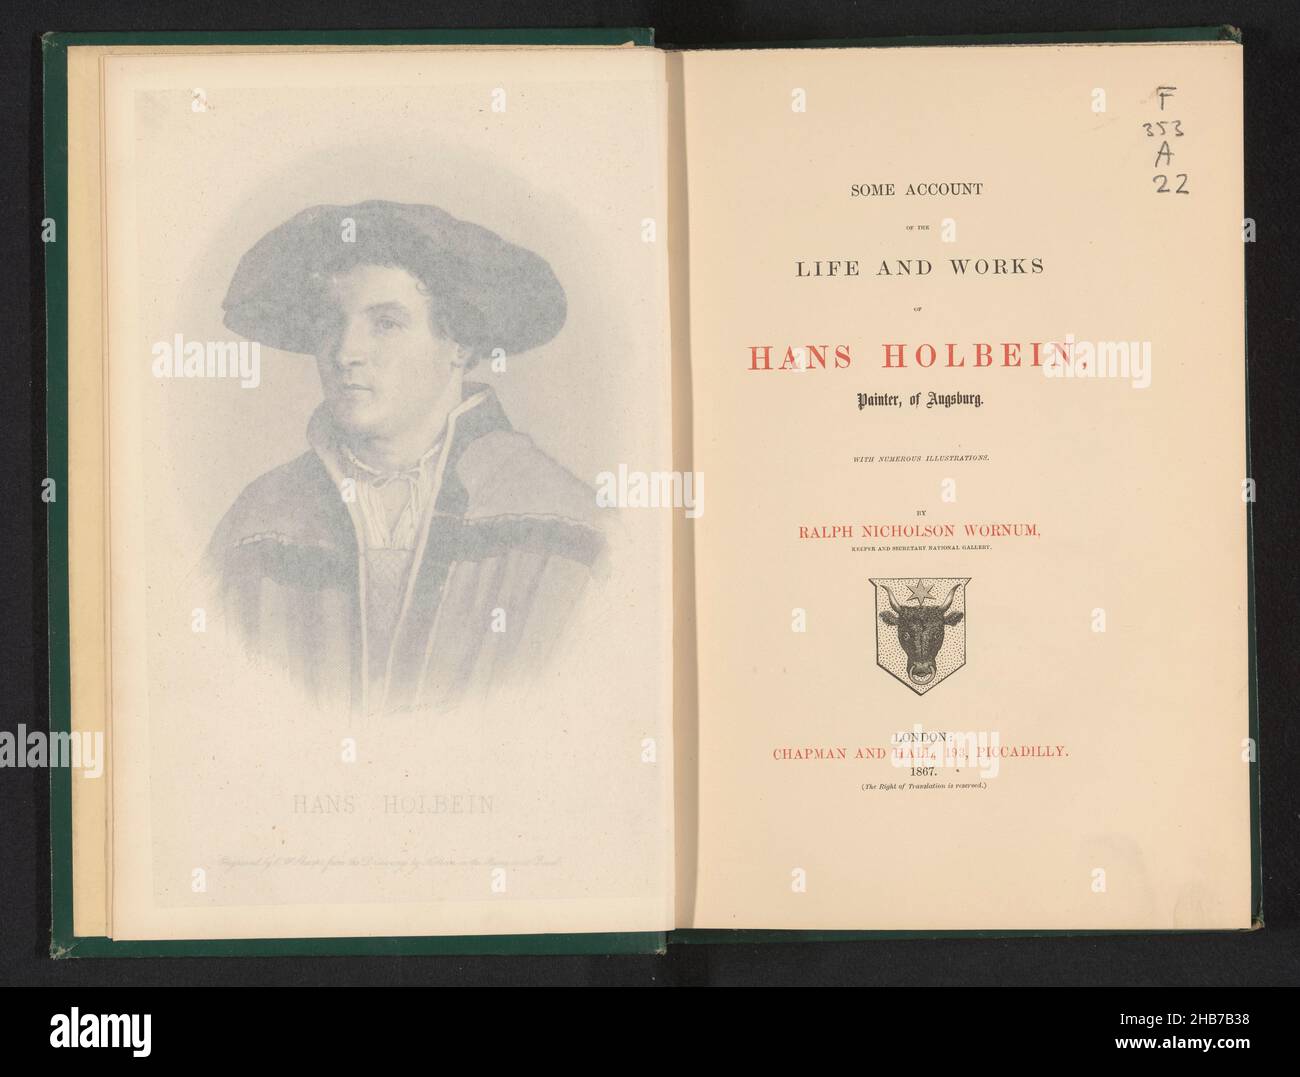 Some account of the life and work of Hans Holbein, painter, of Augsburg, Ralph Nicholson Wornum, (mentioned on object), publisher: Chapman & Hall, (mentioned on object), London, 1867, paper, cardboard, printing, albumen print, engraving, height 282 mm × width 192 mm × thickness 43 mm Stock Photo